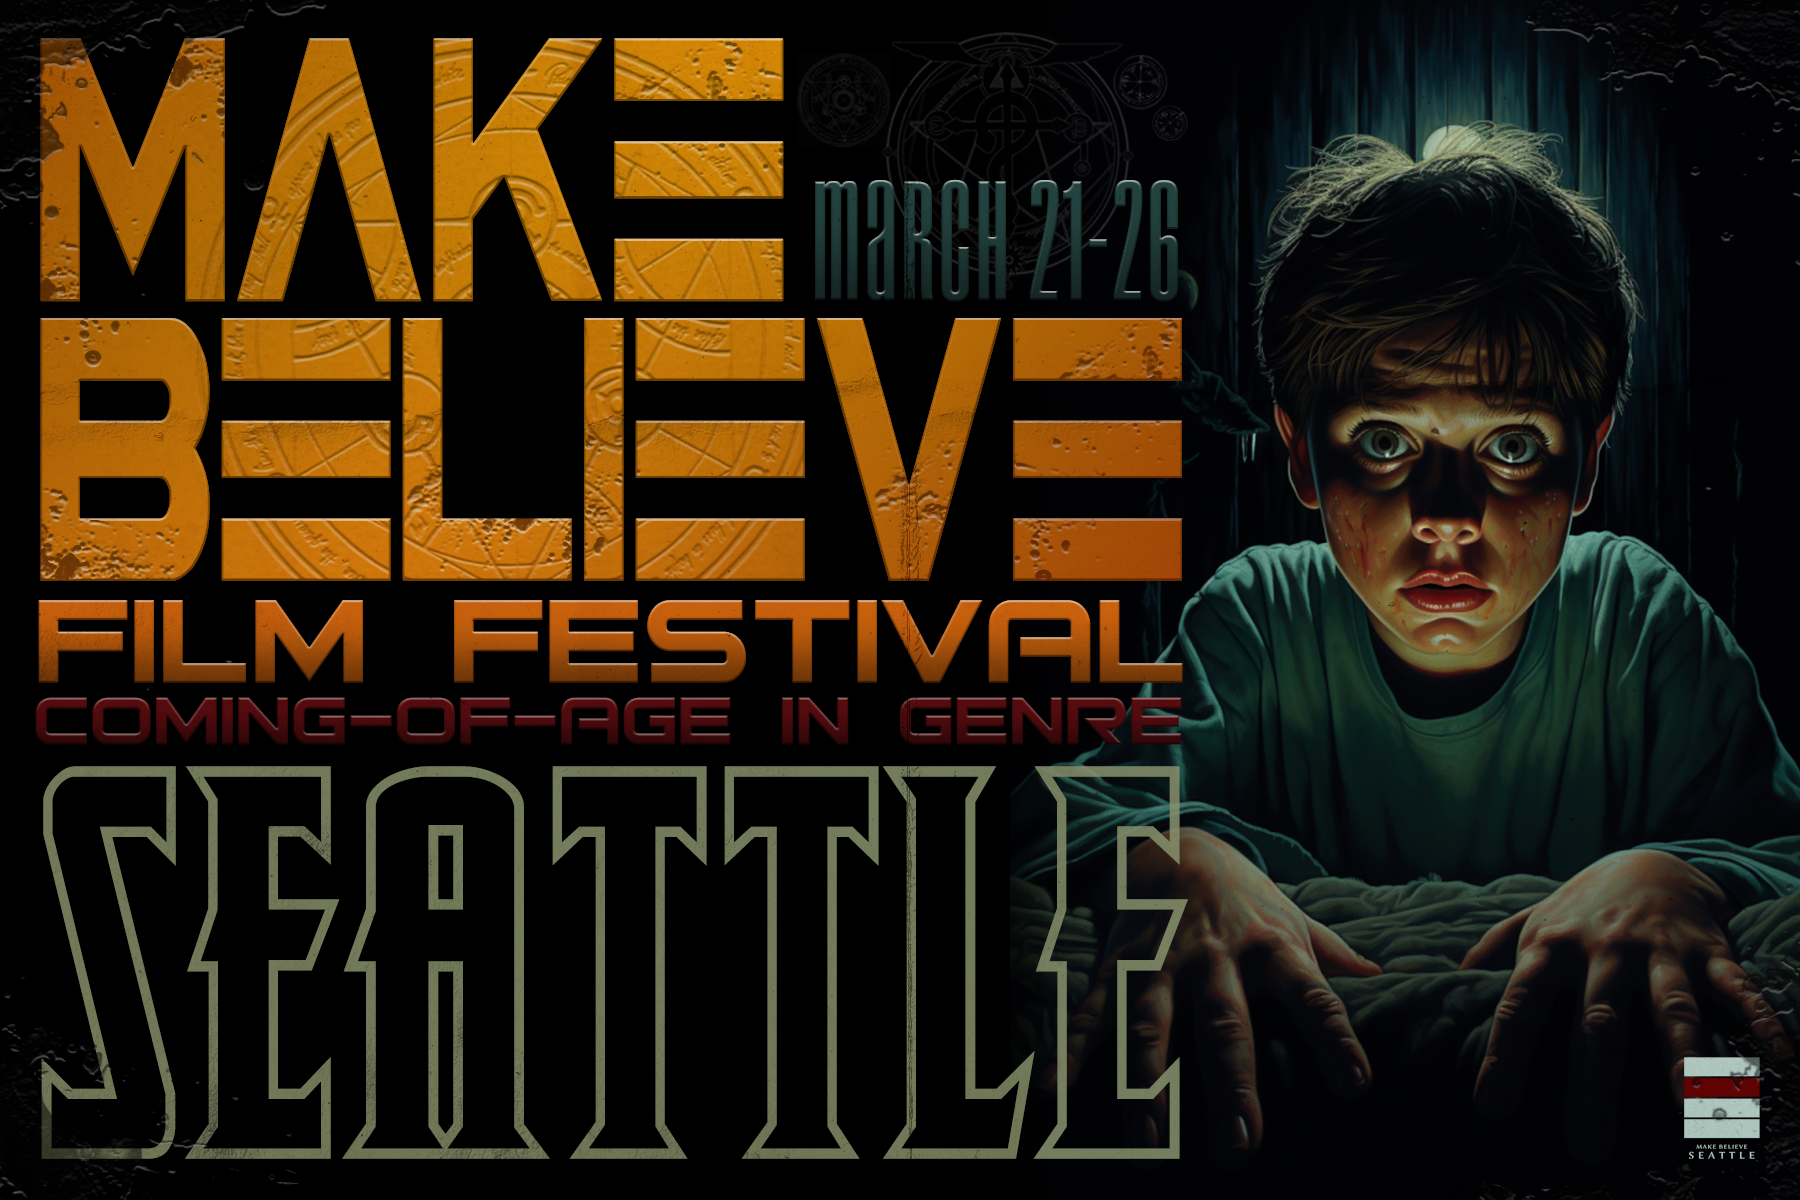 A dark horror themed image of a teen boy looking straight ahead with blood lightly splattered on his face along with the words in yellow "MAKE BEILEVE FILM FESTIVAL - Coming of Age In Genre, Seattle. March 21st-26"